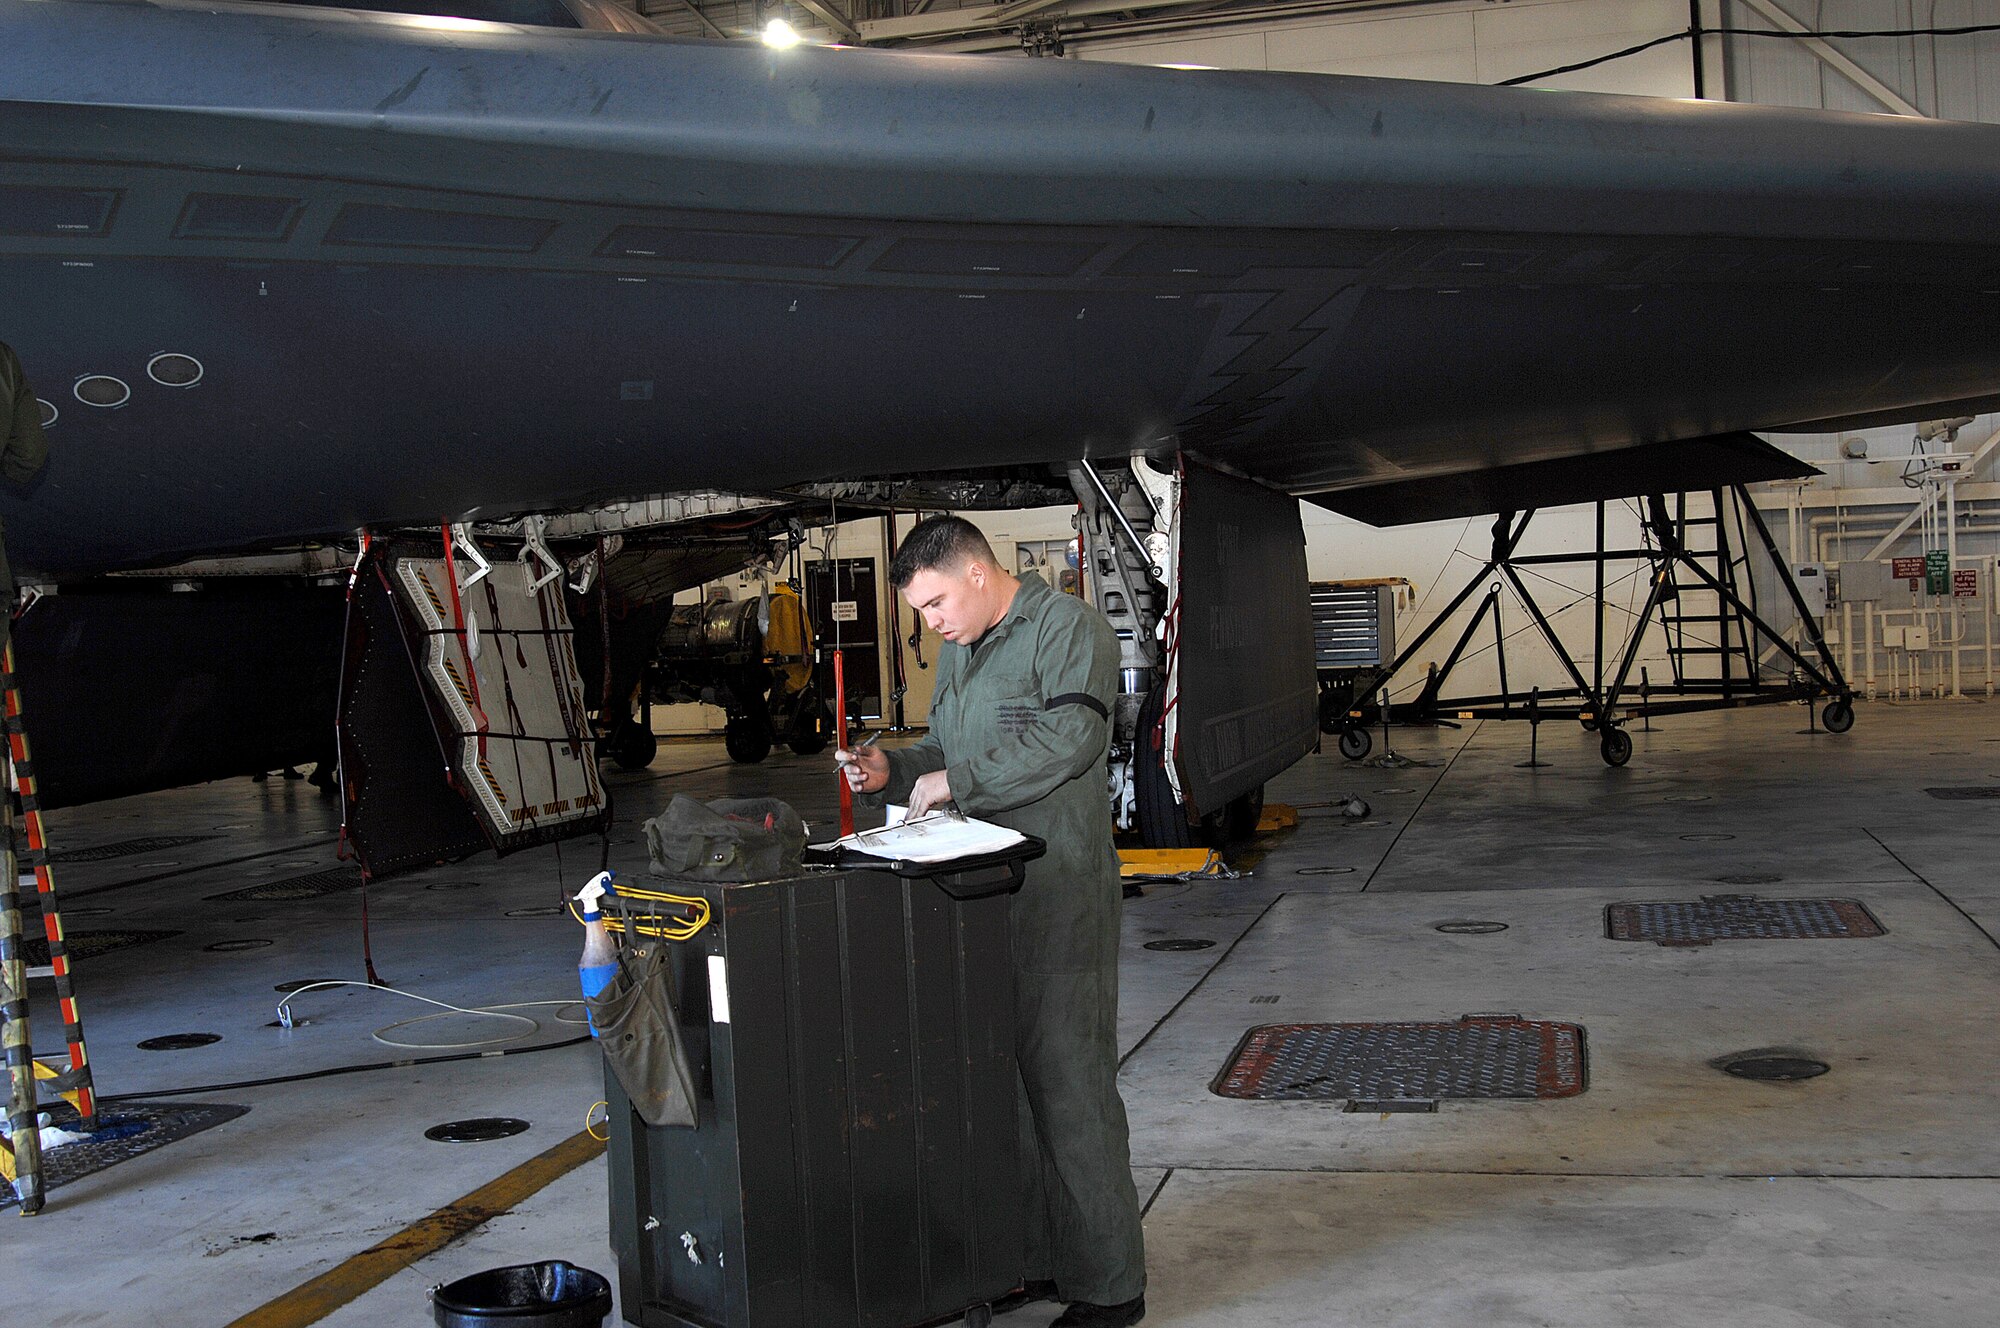 WHITEMAN AIR FORCE BASE, Mo. – Senior Airman Scott Kures, 509th Aircraft Maintenance Squadron who is also the crew chief of the Spirit of Pennsylvania, reviews forms before maintenance is performed on the aircraft Oct. 24.(U.S. Air Force photo/Tech. Sgt. Samuel A. Park)